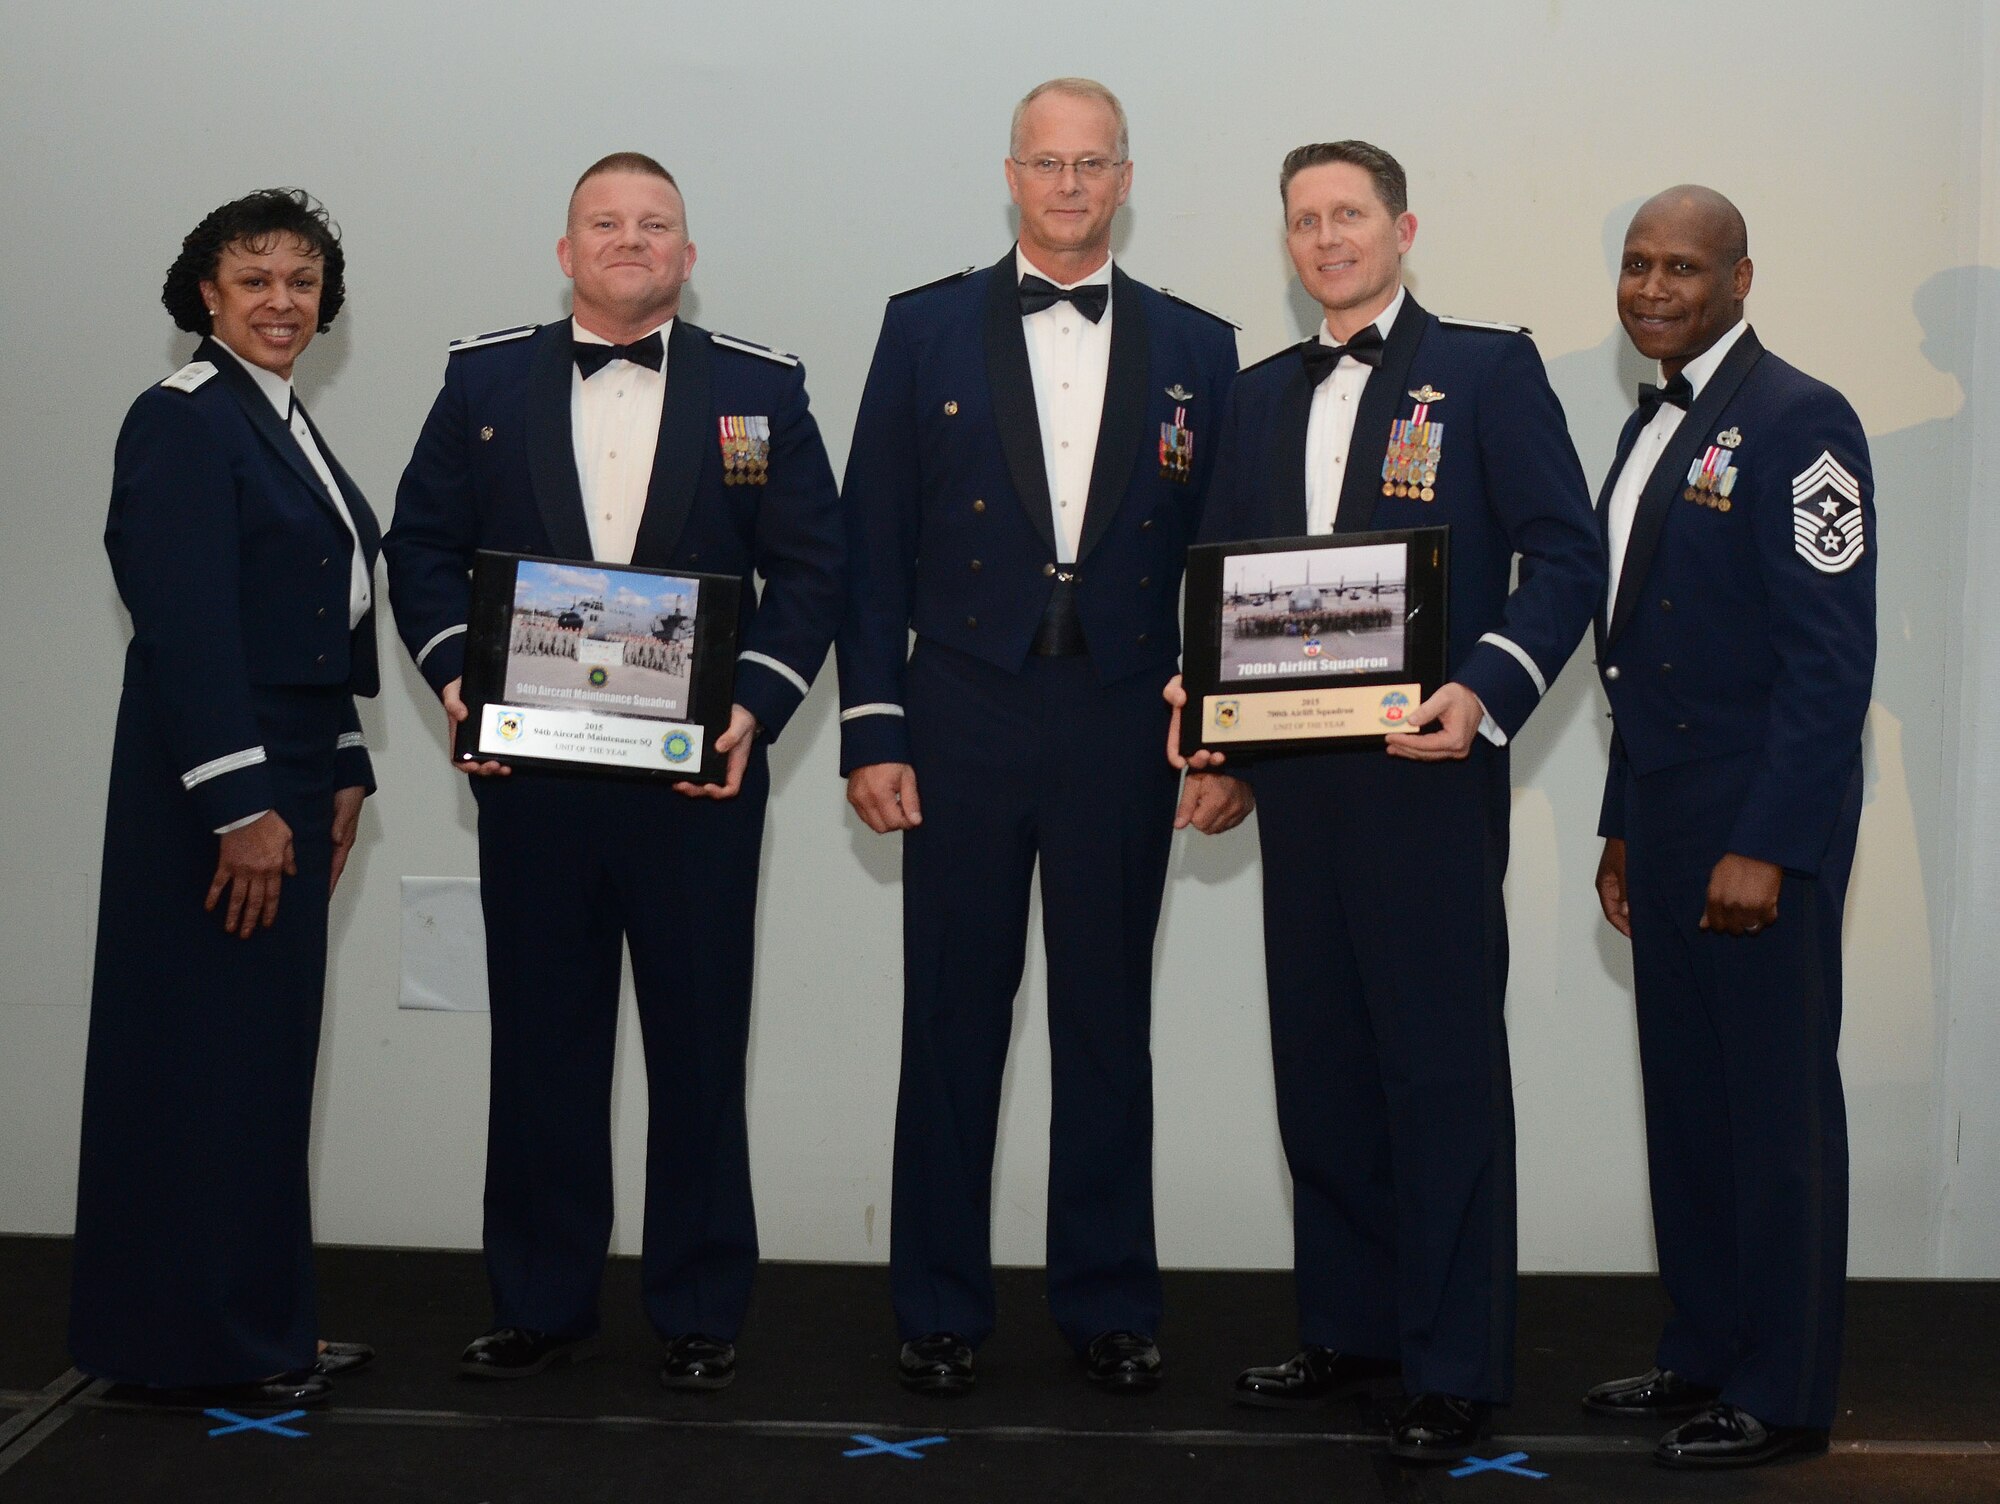 Units of the Year are recognized in a tie for the win at Dobbins Recognition Ceremony, March 5, 2016.